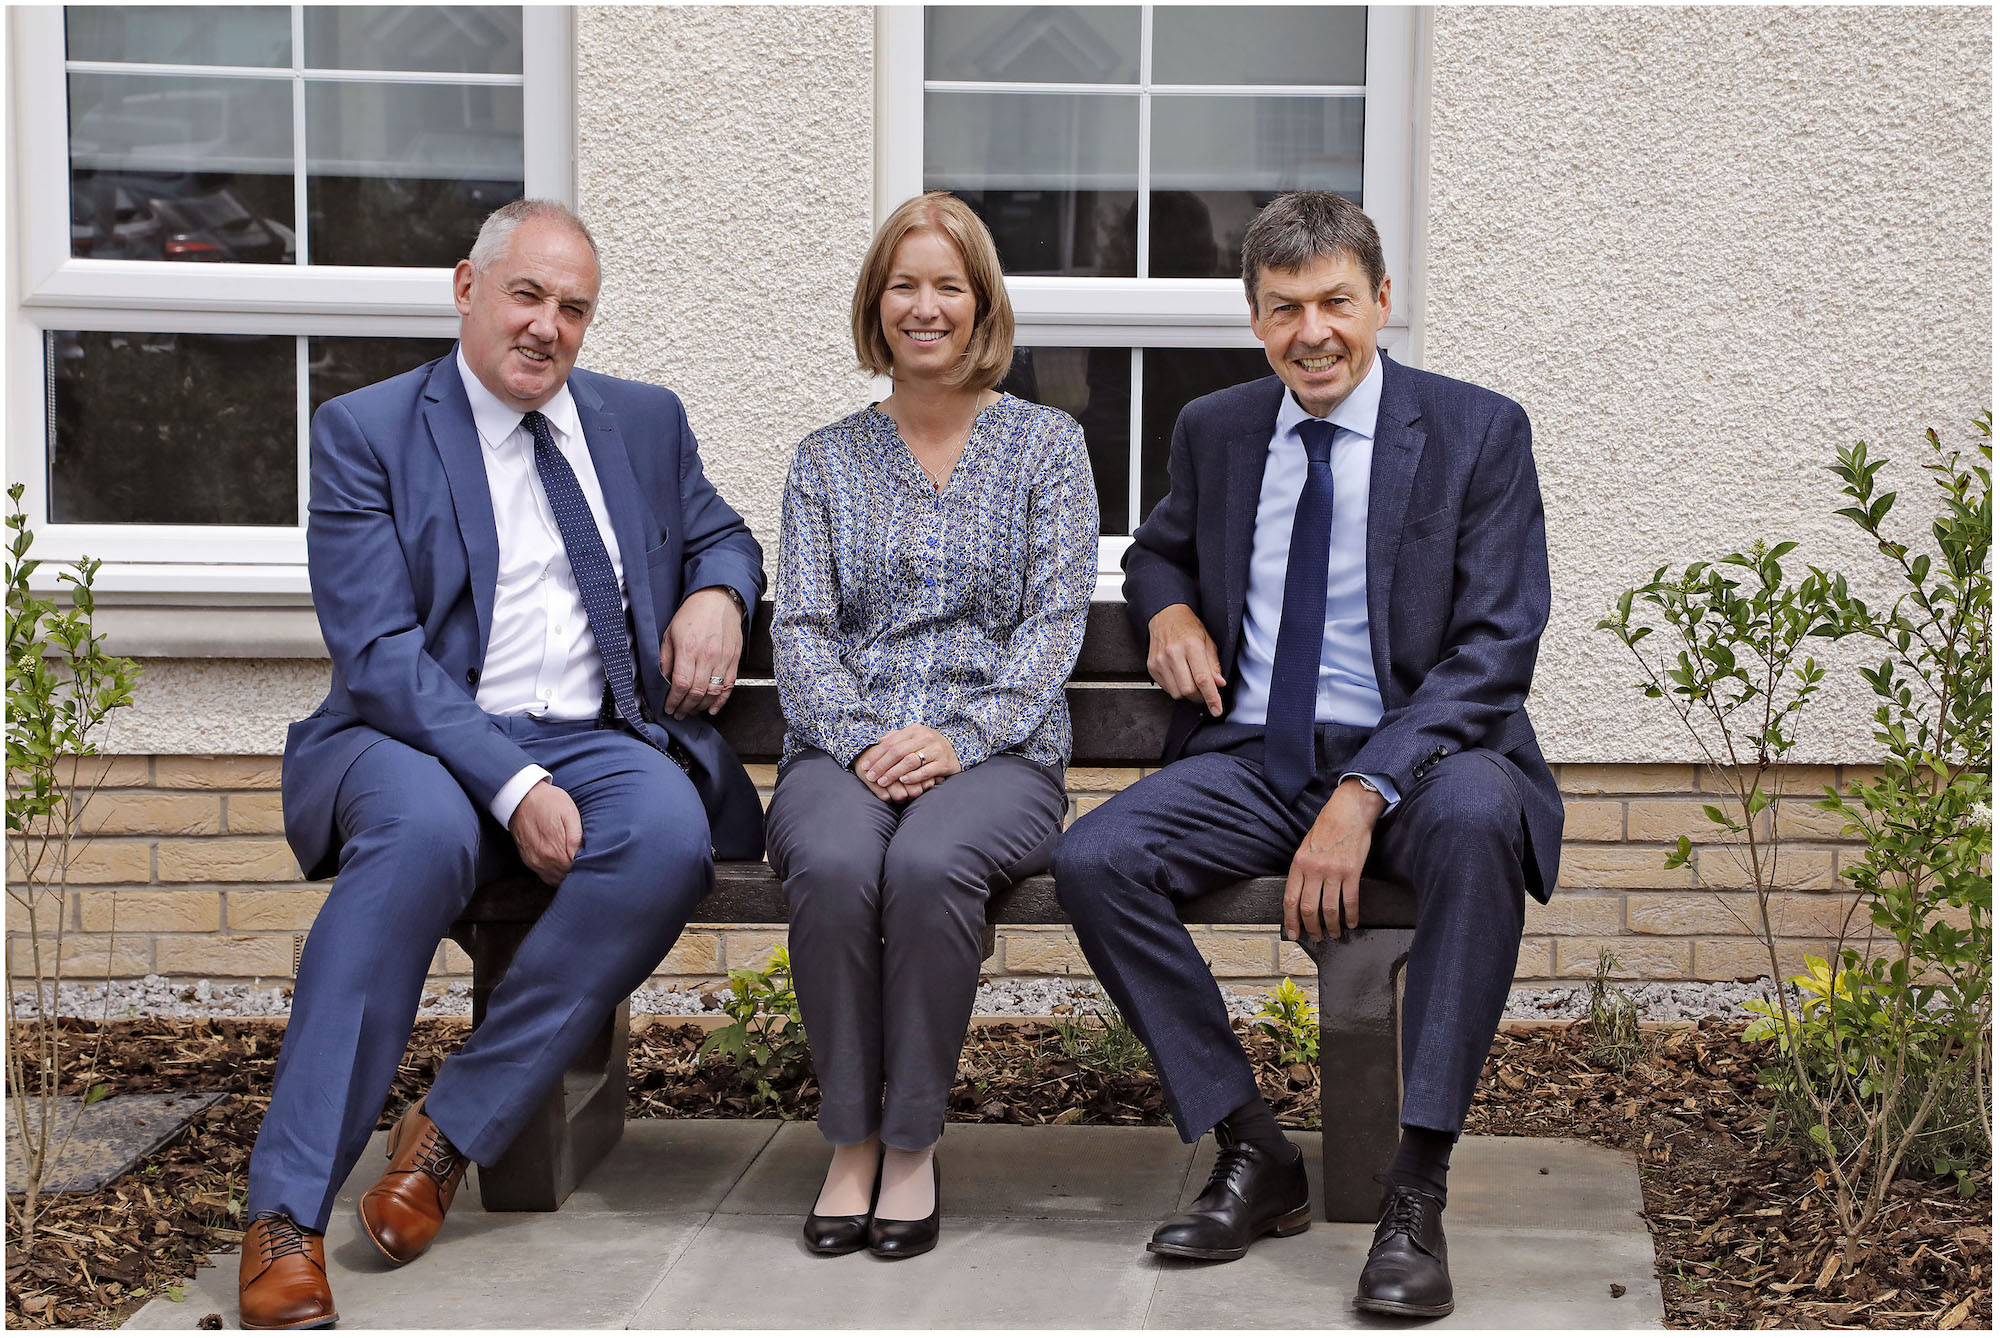 Lar Housing Trust expands in East Lothian amid record demand